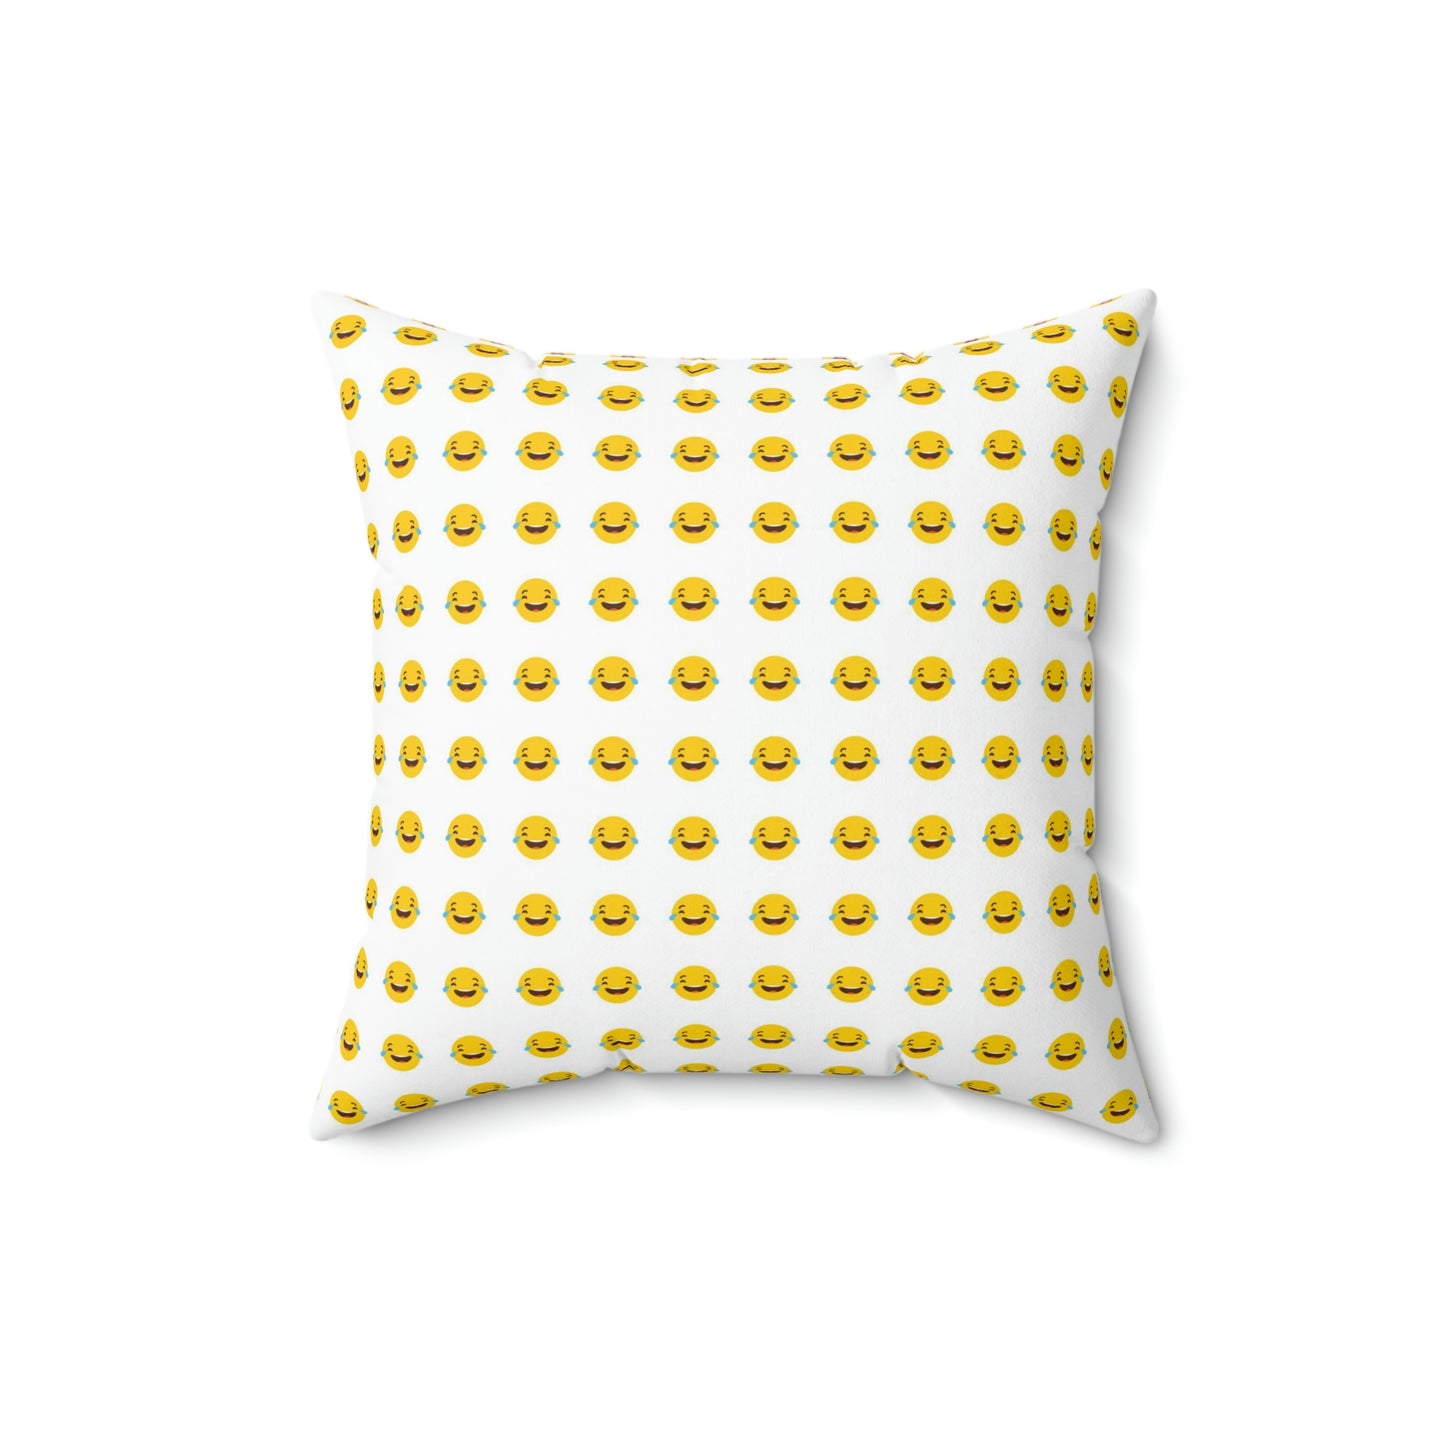 Geotrott Emojis Face with Tears of Joy White Spun Polyester Square Pillow